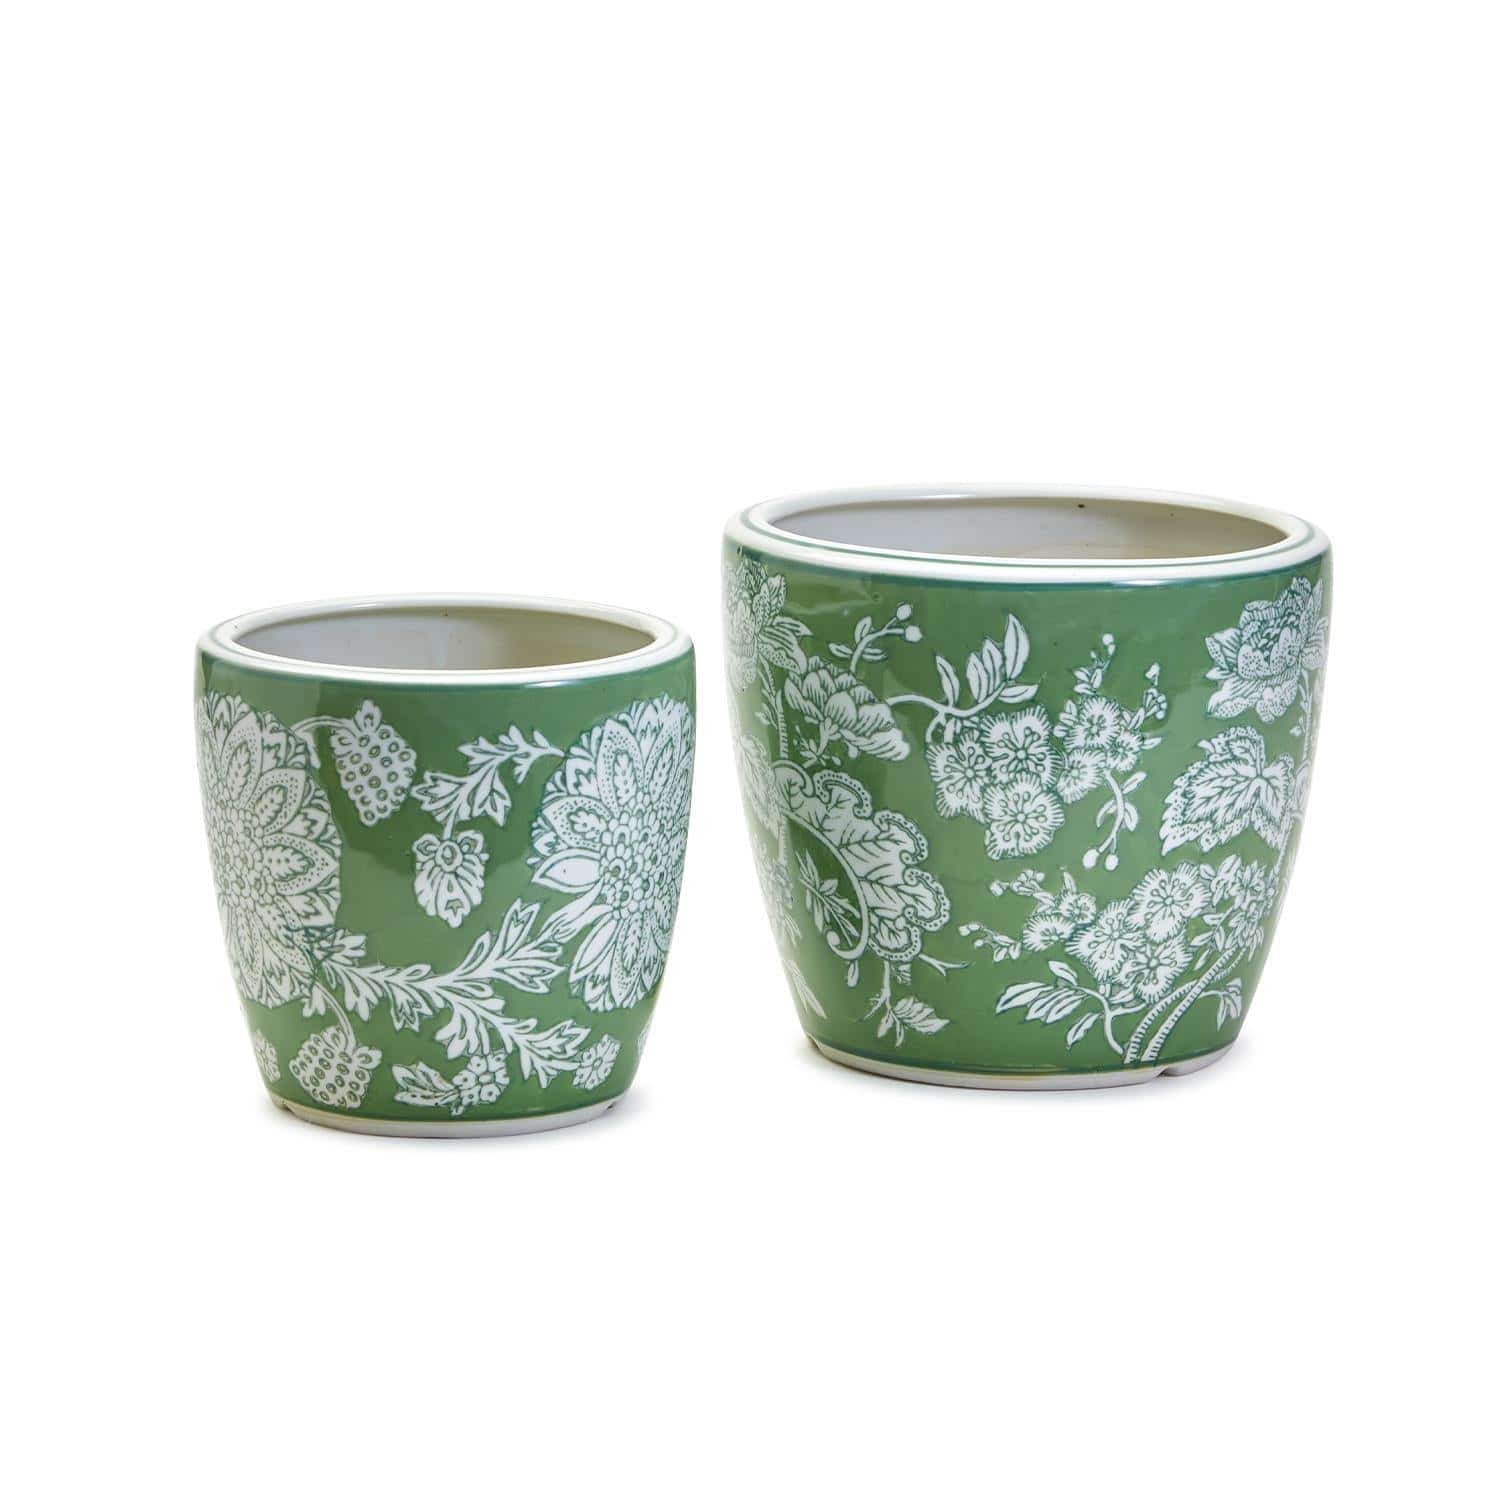 Countryside Hand-Painted Cachepots - Porcelain - The Preppy Bunny